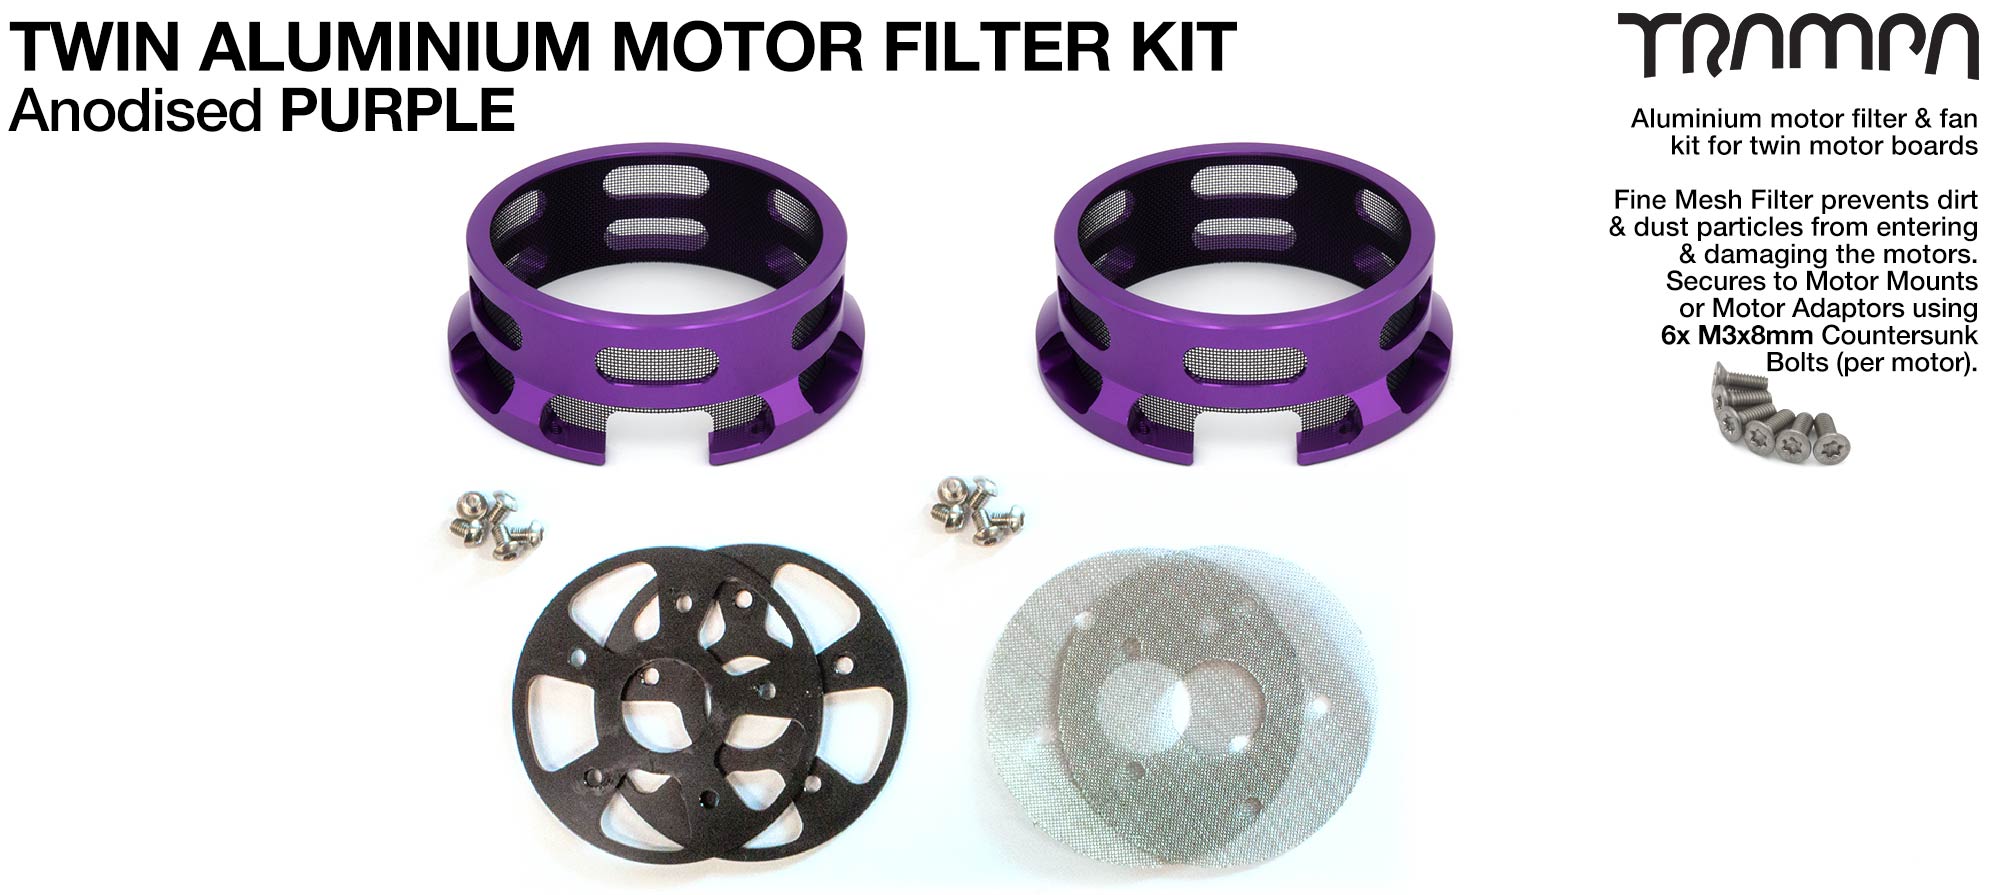 HALF CAGE Motor protection  - PURPLE anodised with Filters - TWIN